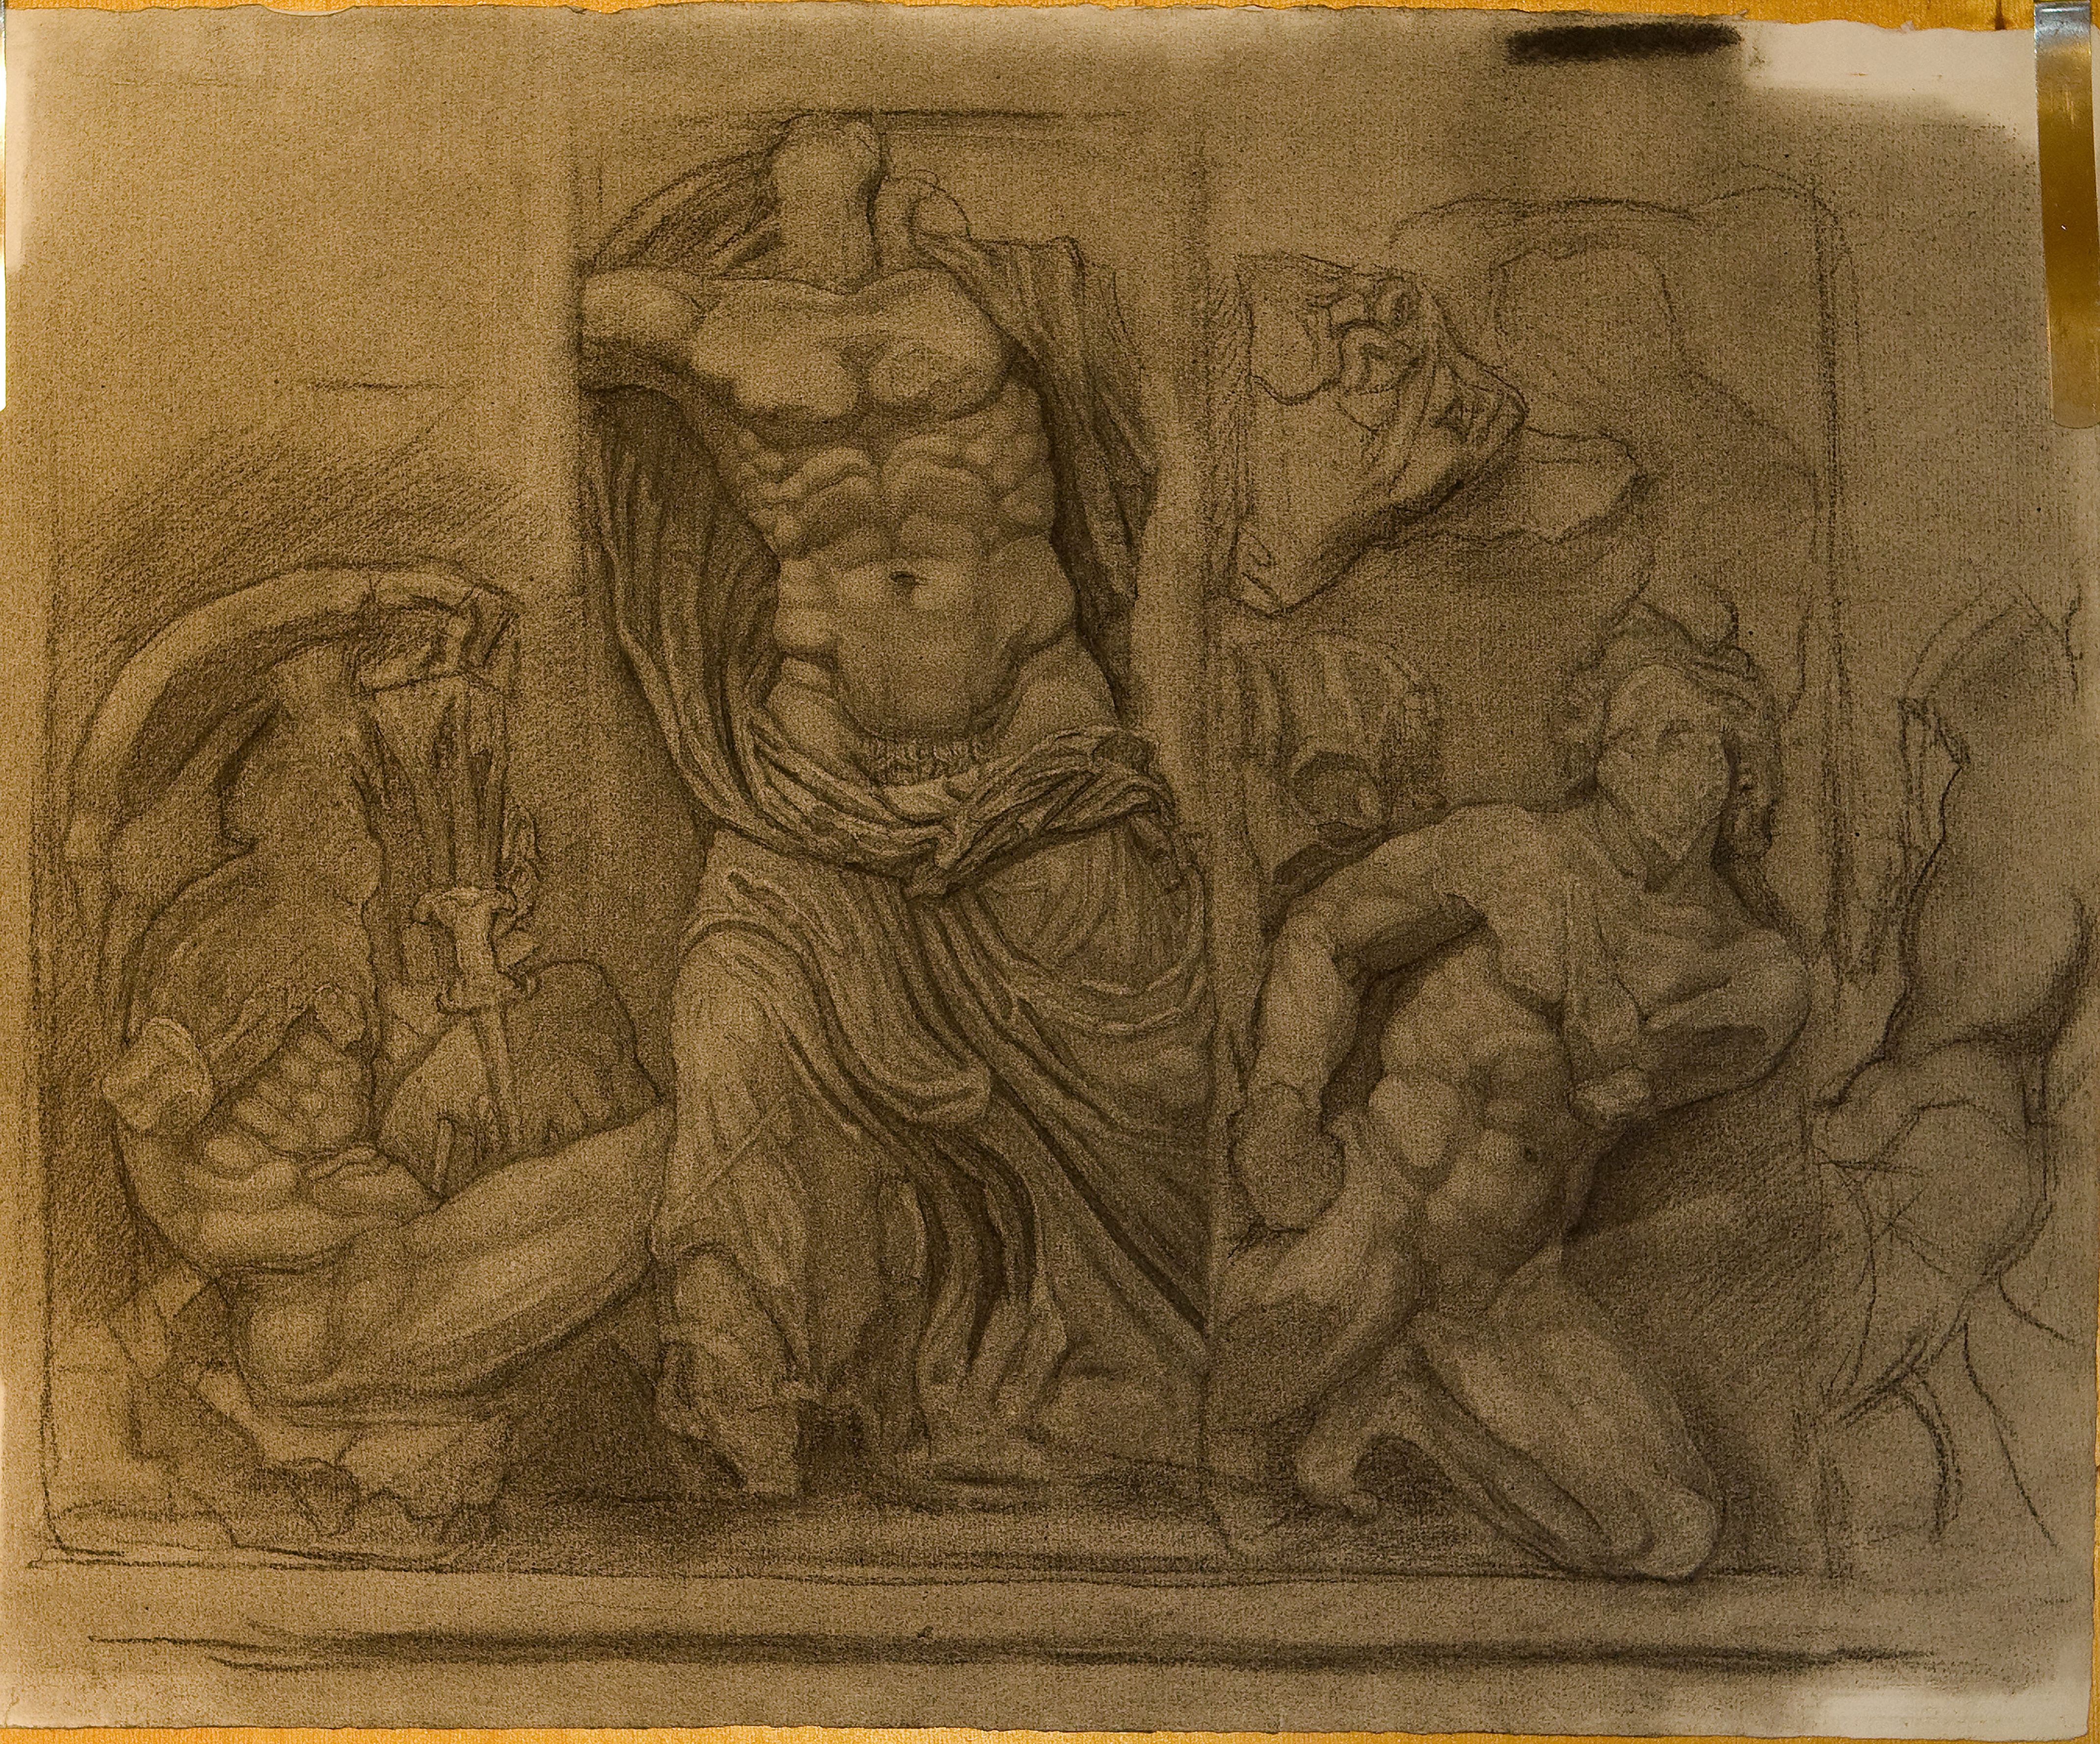 Pergamon Altar Relief, Hellenistic Sculpture from Turkey, now in the Pergamon Museum, Berlin, charcoal, by P. Brad Parker